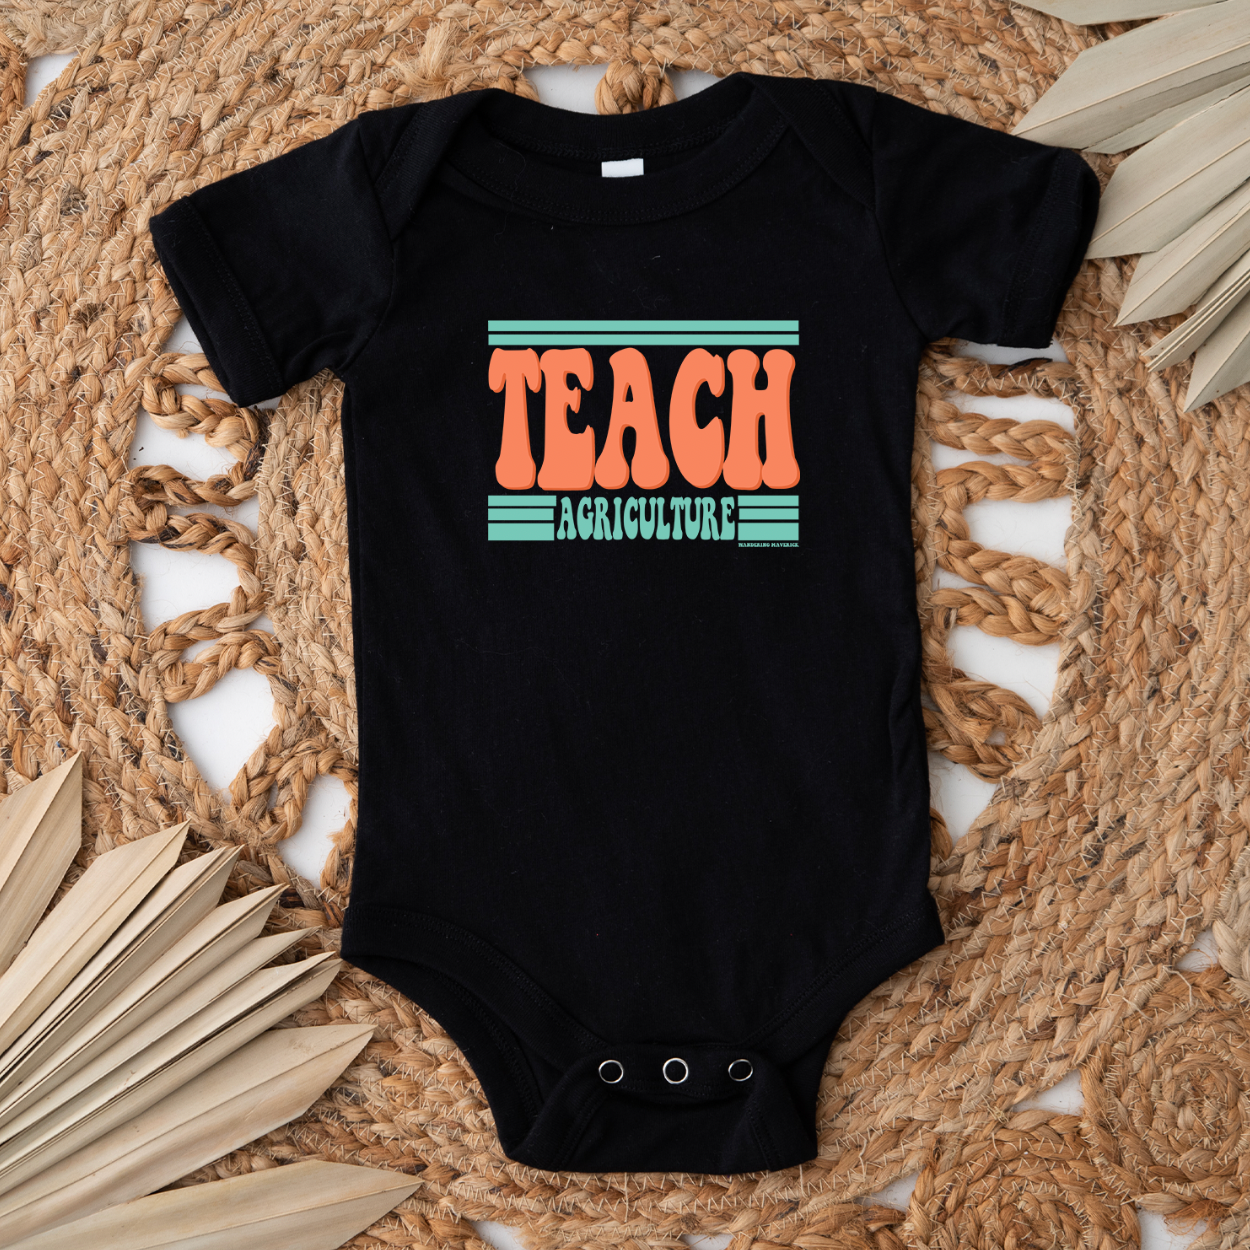 Retro Teach Agriculture One Piece/T-Shirt (Newborn - Youth XL) - Multiple Colors!